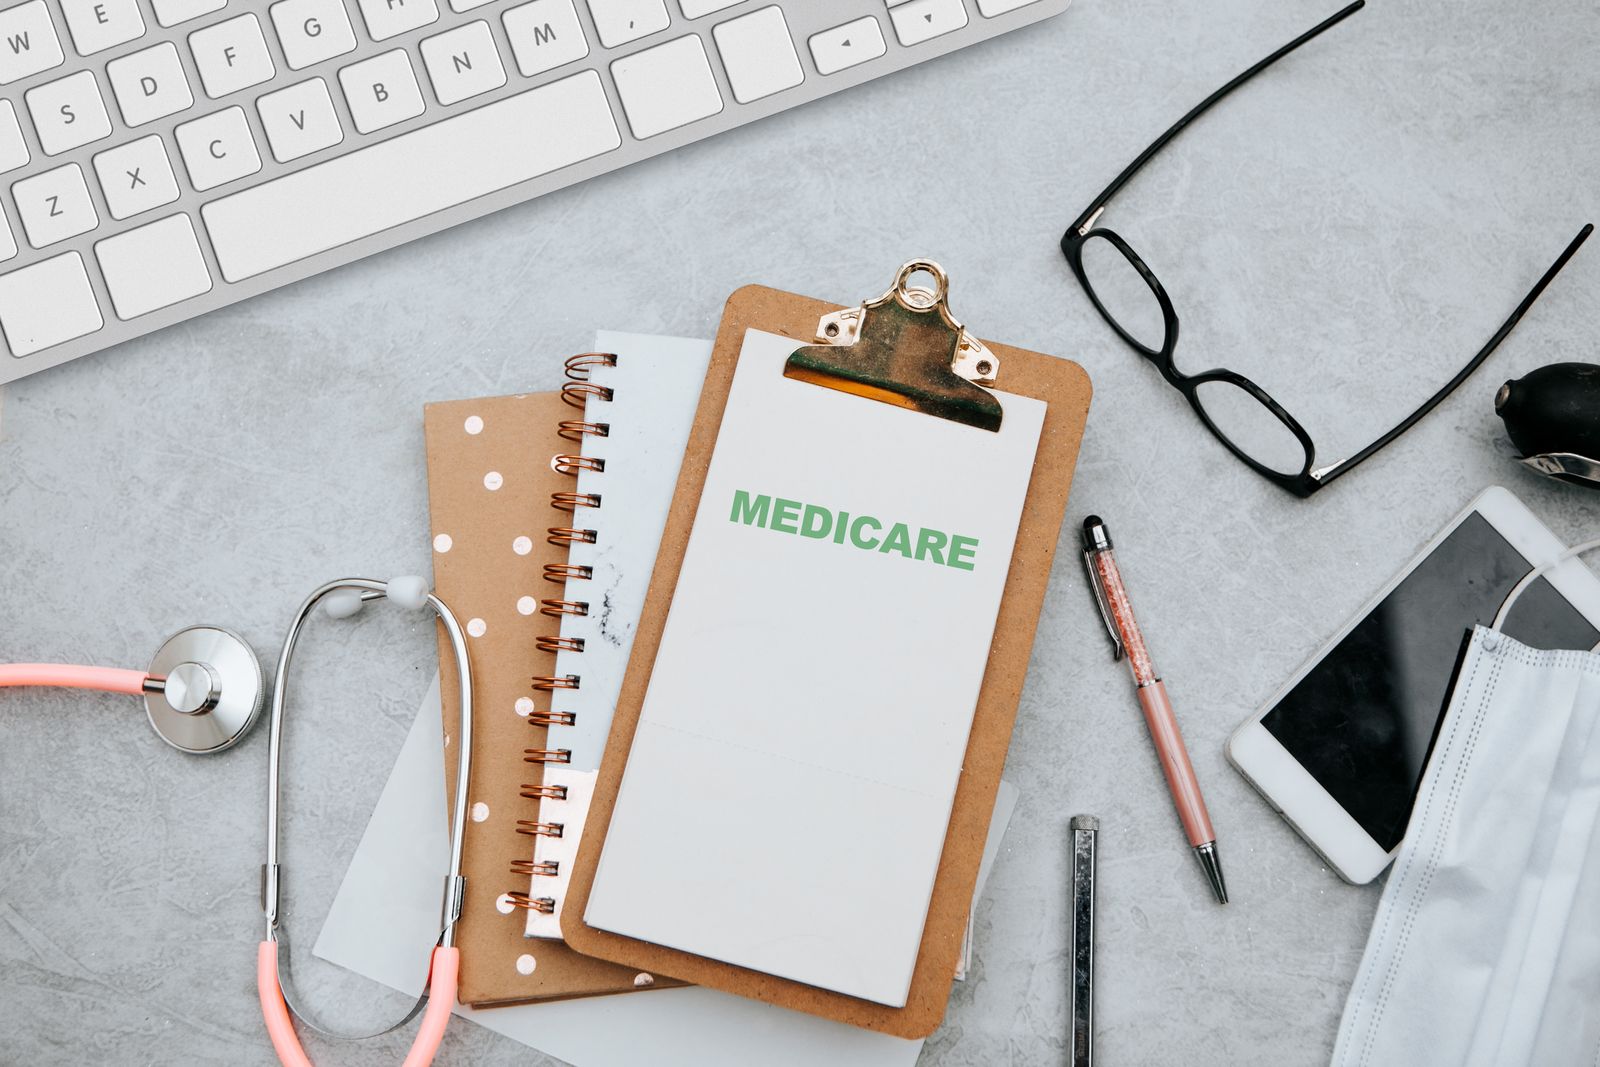 Related Monthly Adjustment Amount (IRMAA) for 2024 Medicare Part